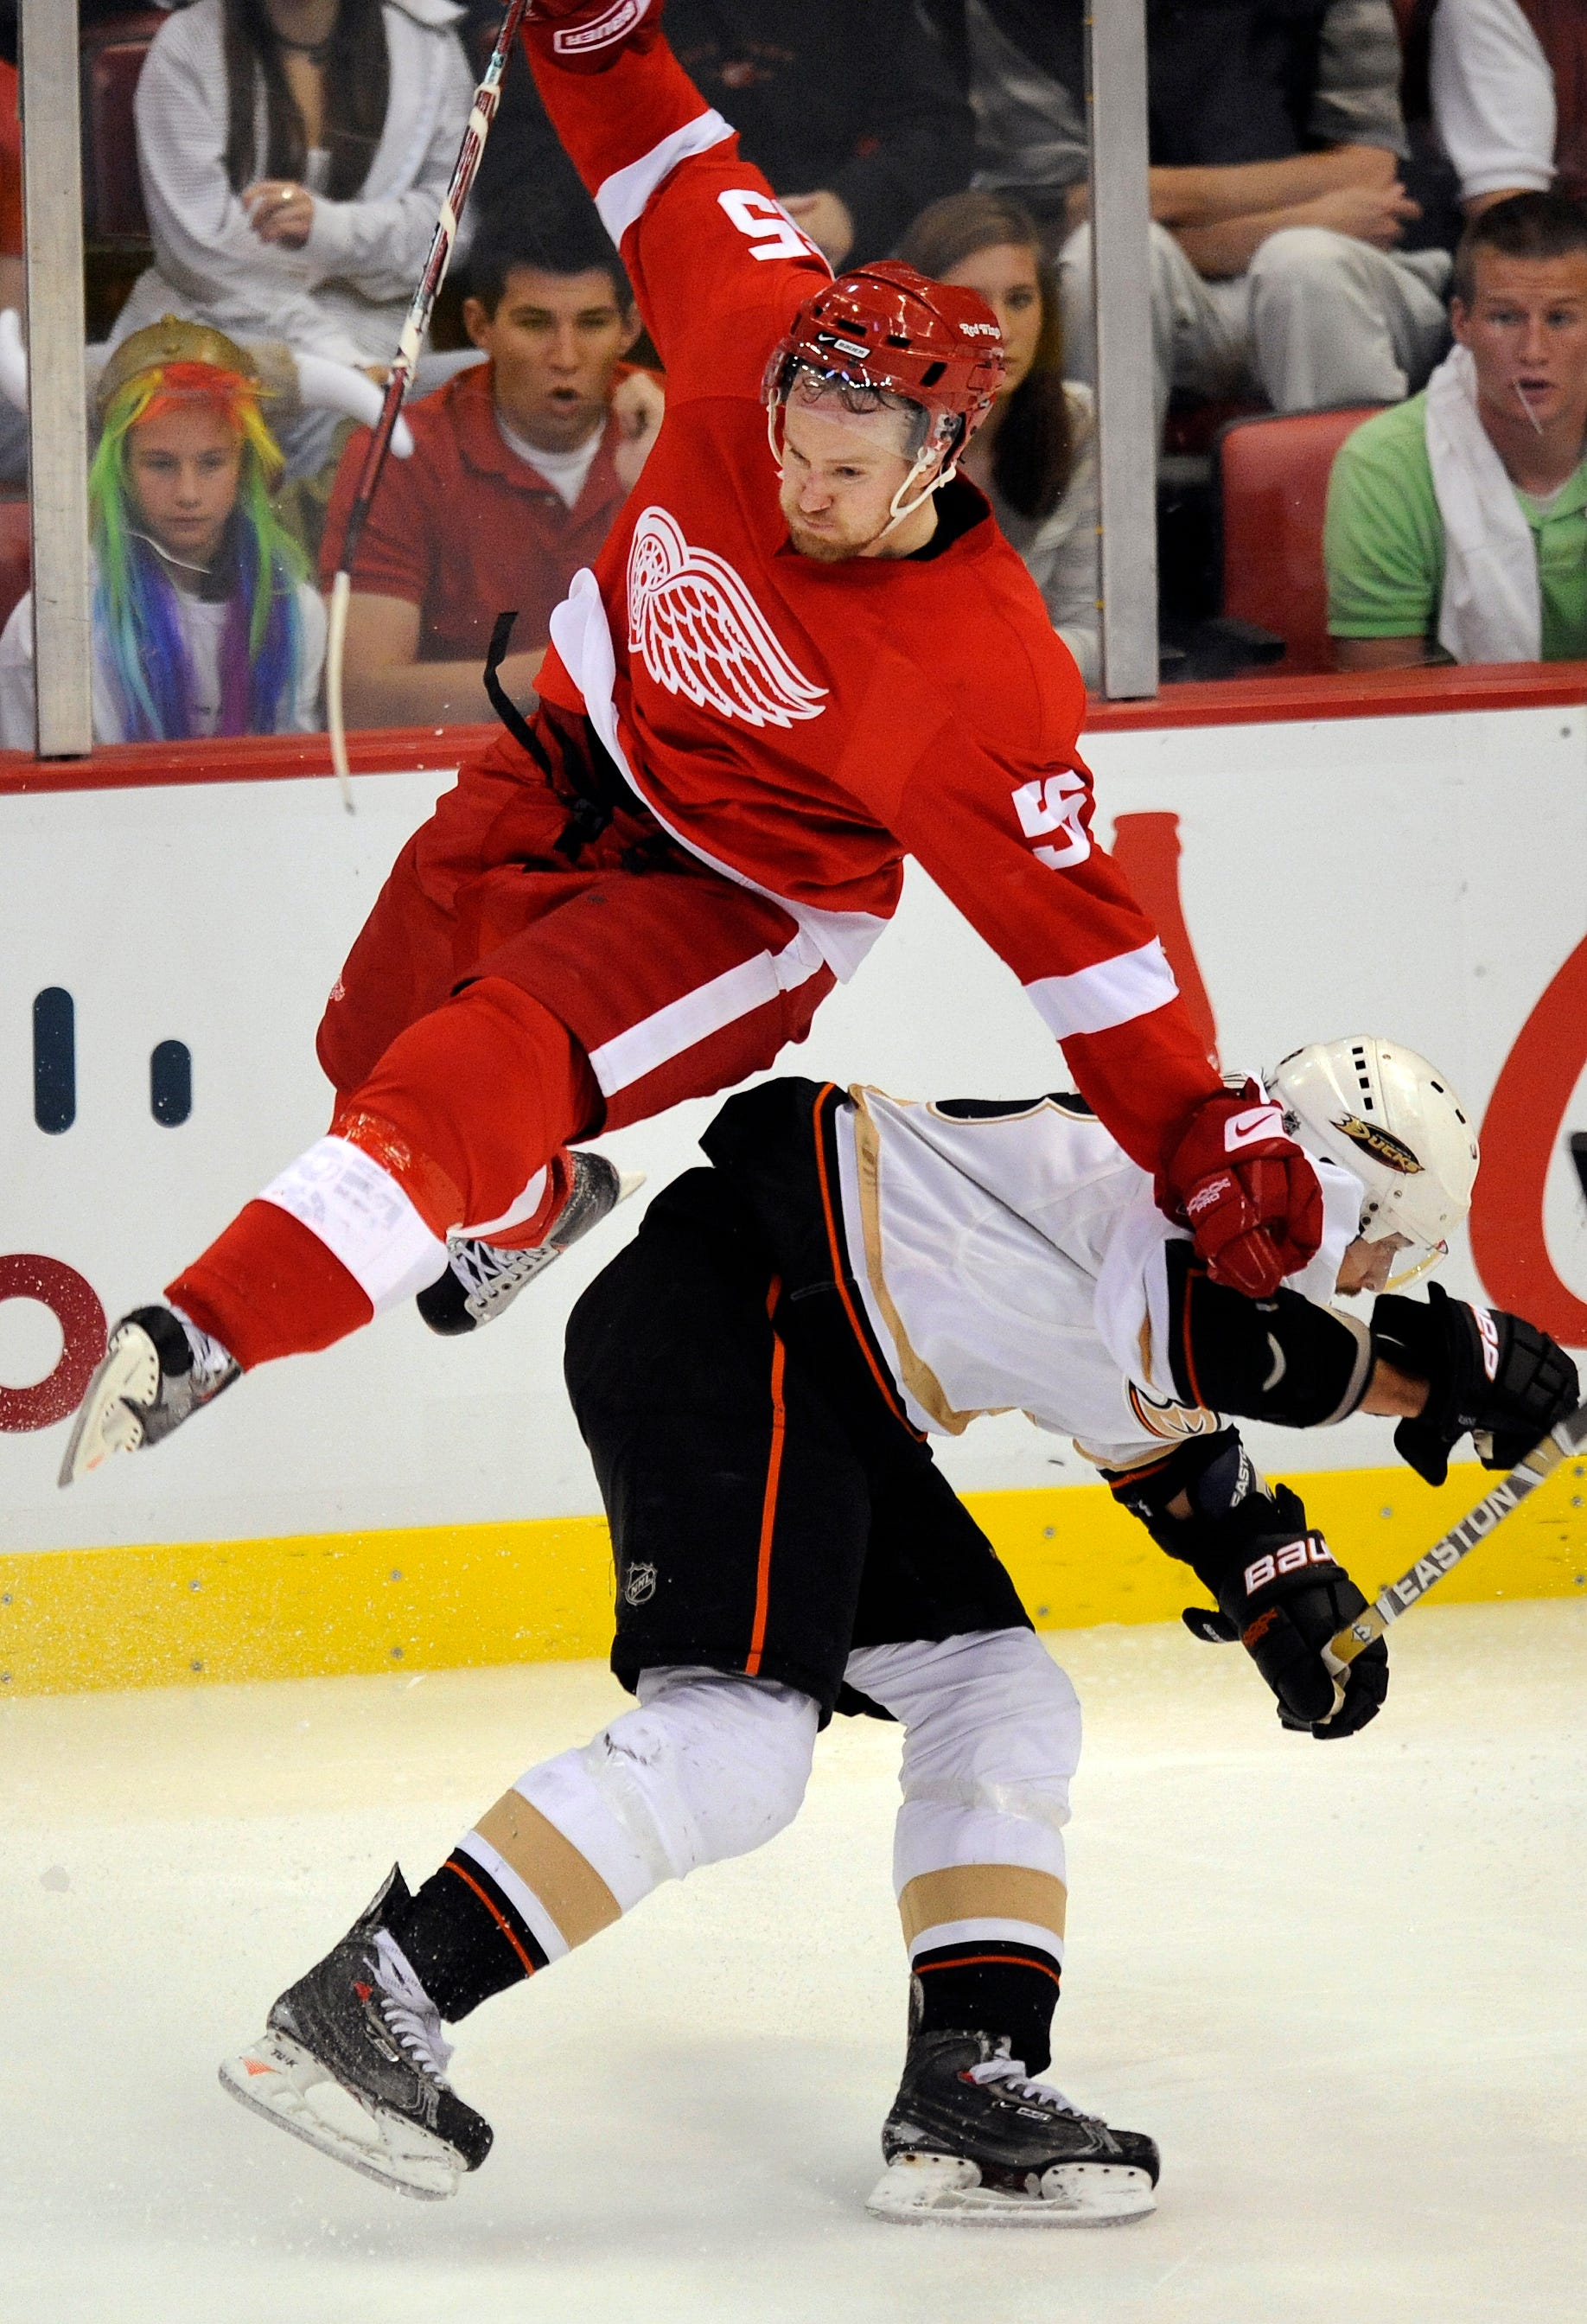 Detroit Red Wings defenseman Niklas Kronwall collides with Anaheim Ducks right wing Teemu Selanne. The open-ice hit sent both of them sprawling to the ice during overtime of a playoff game on May 3, 2009.